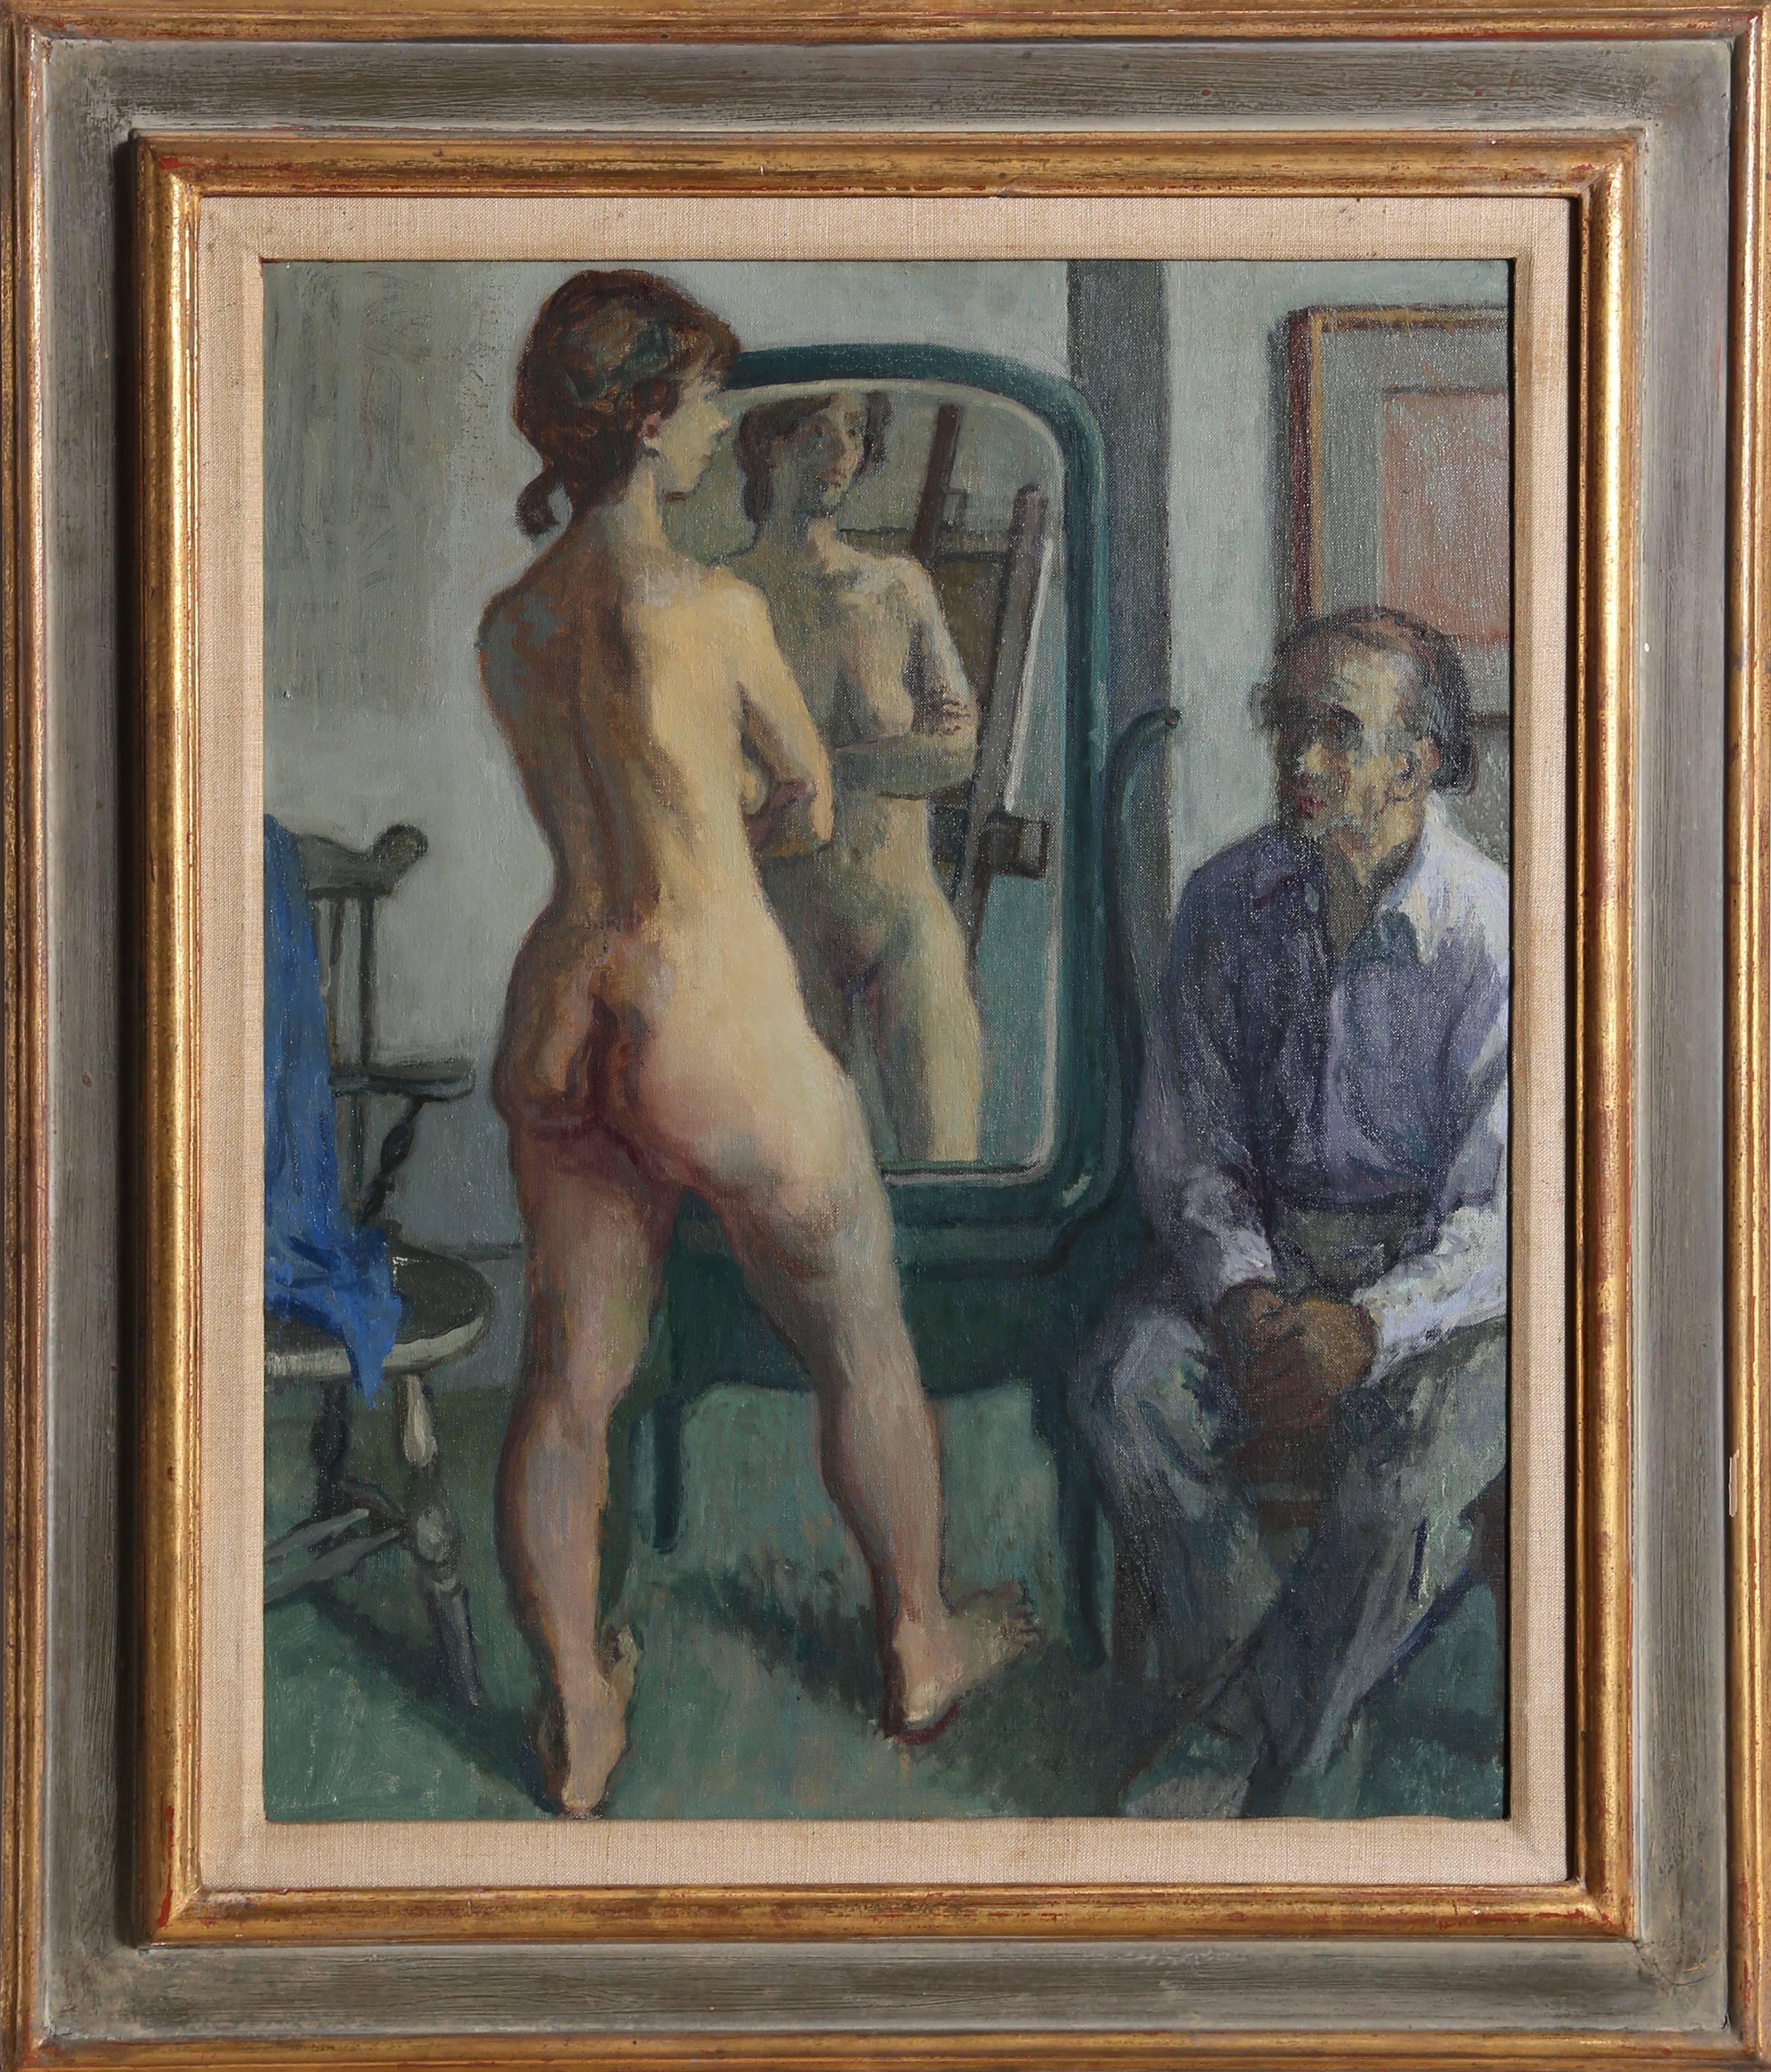 Nude Painting Moses Soyer - H.G avec nu debout